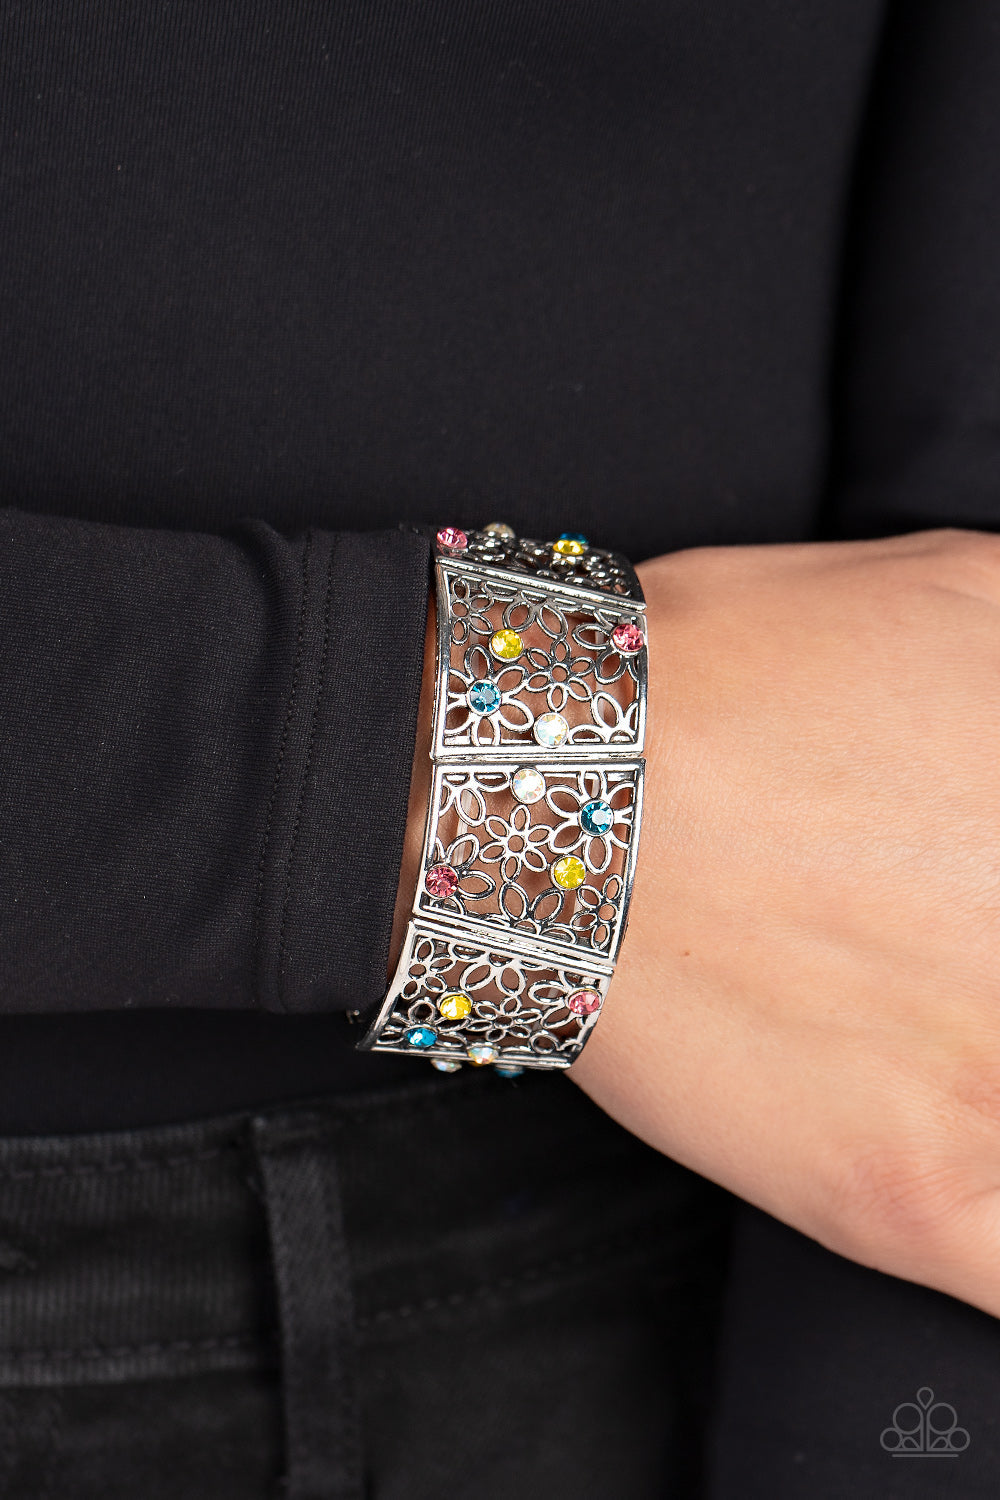 Spring Greetings - Multi Color and Silver Bracelet - Paparazzi Accessories - Multicolored and iridescent rhinestones, an airy daisy pattern blooms inside silver frames that are threaded along stretchy bands around the wrist.